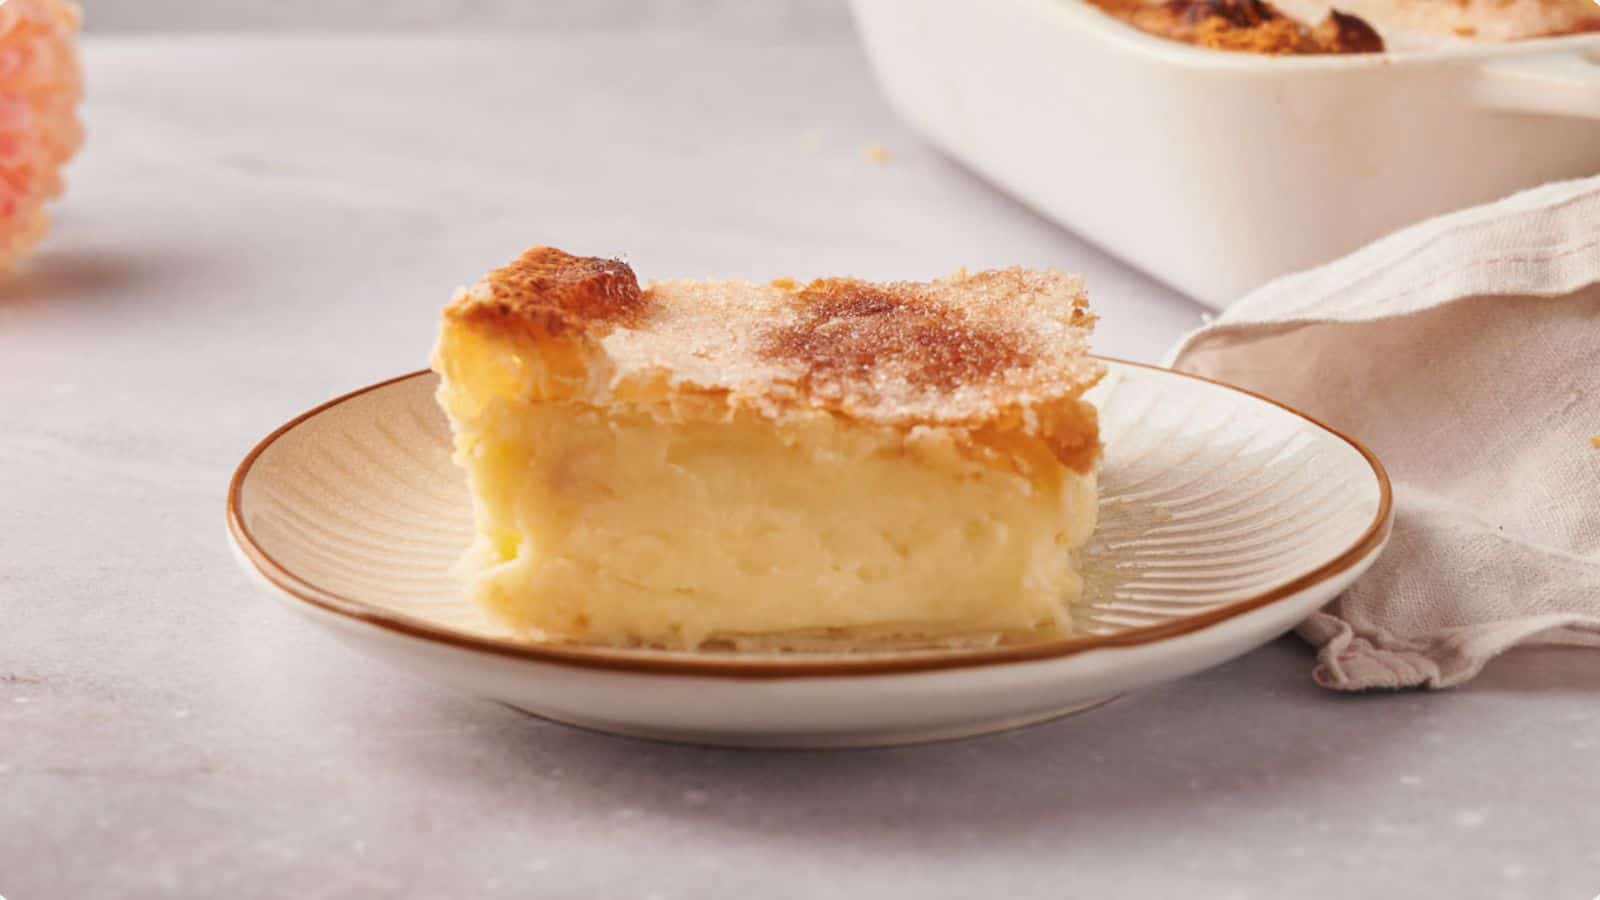 <p>If you’re looking for dessert, stop right here. This Sopapilla Cheesecake marries sweet and savory in a dish that’s ready in no time. Creamy, crispy, and utterly irresistible—it’s everything you’ve been craving.<br><strong>Get the Recipe: </strong><a href="https://www.splashoftaste.com/sopapilla-cheesecake/?utm_source=msn&utm_medium=page&utm_campaign=msn">Sopapilla Cheesecake</a></p>